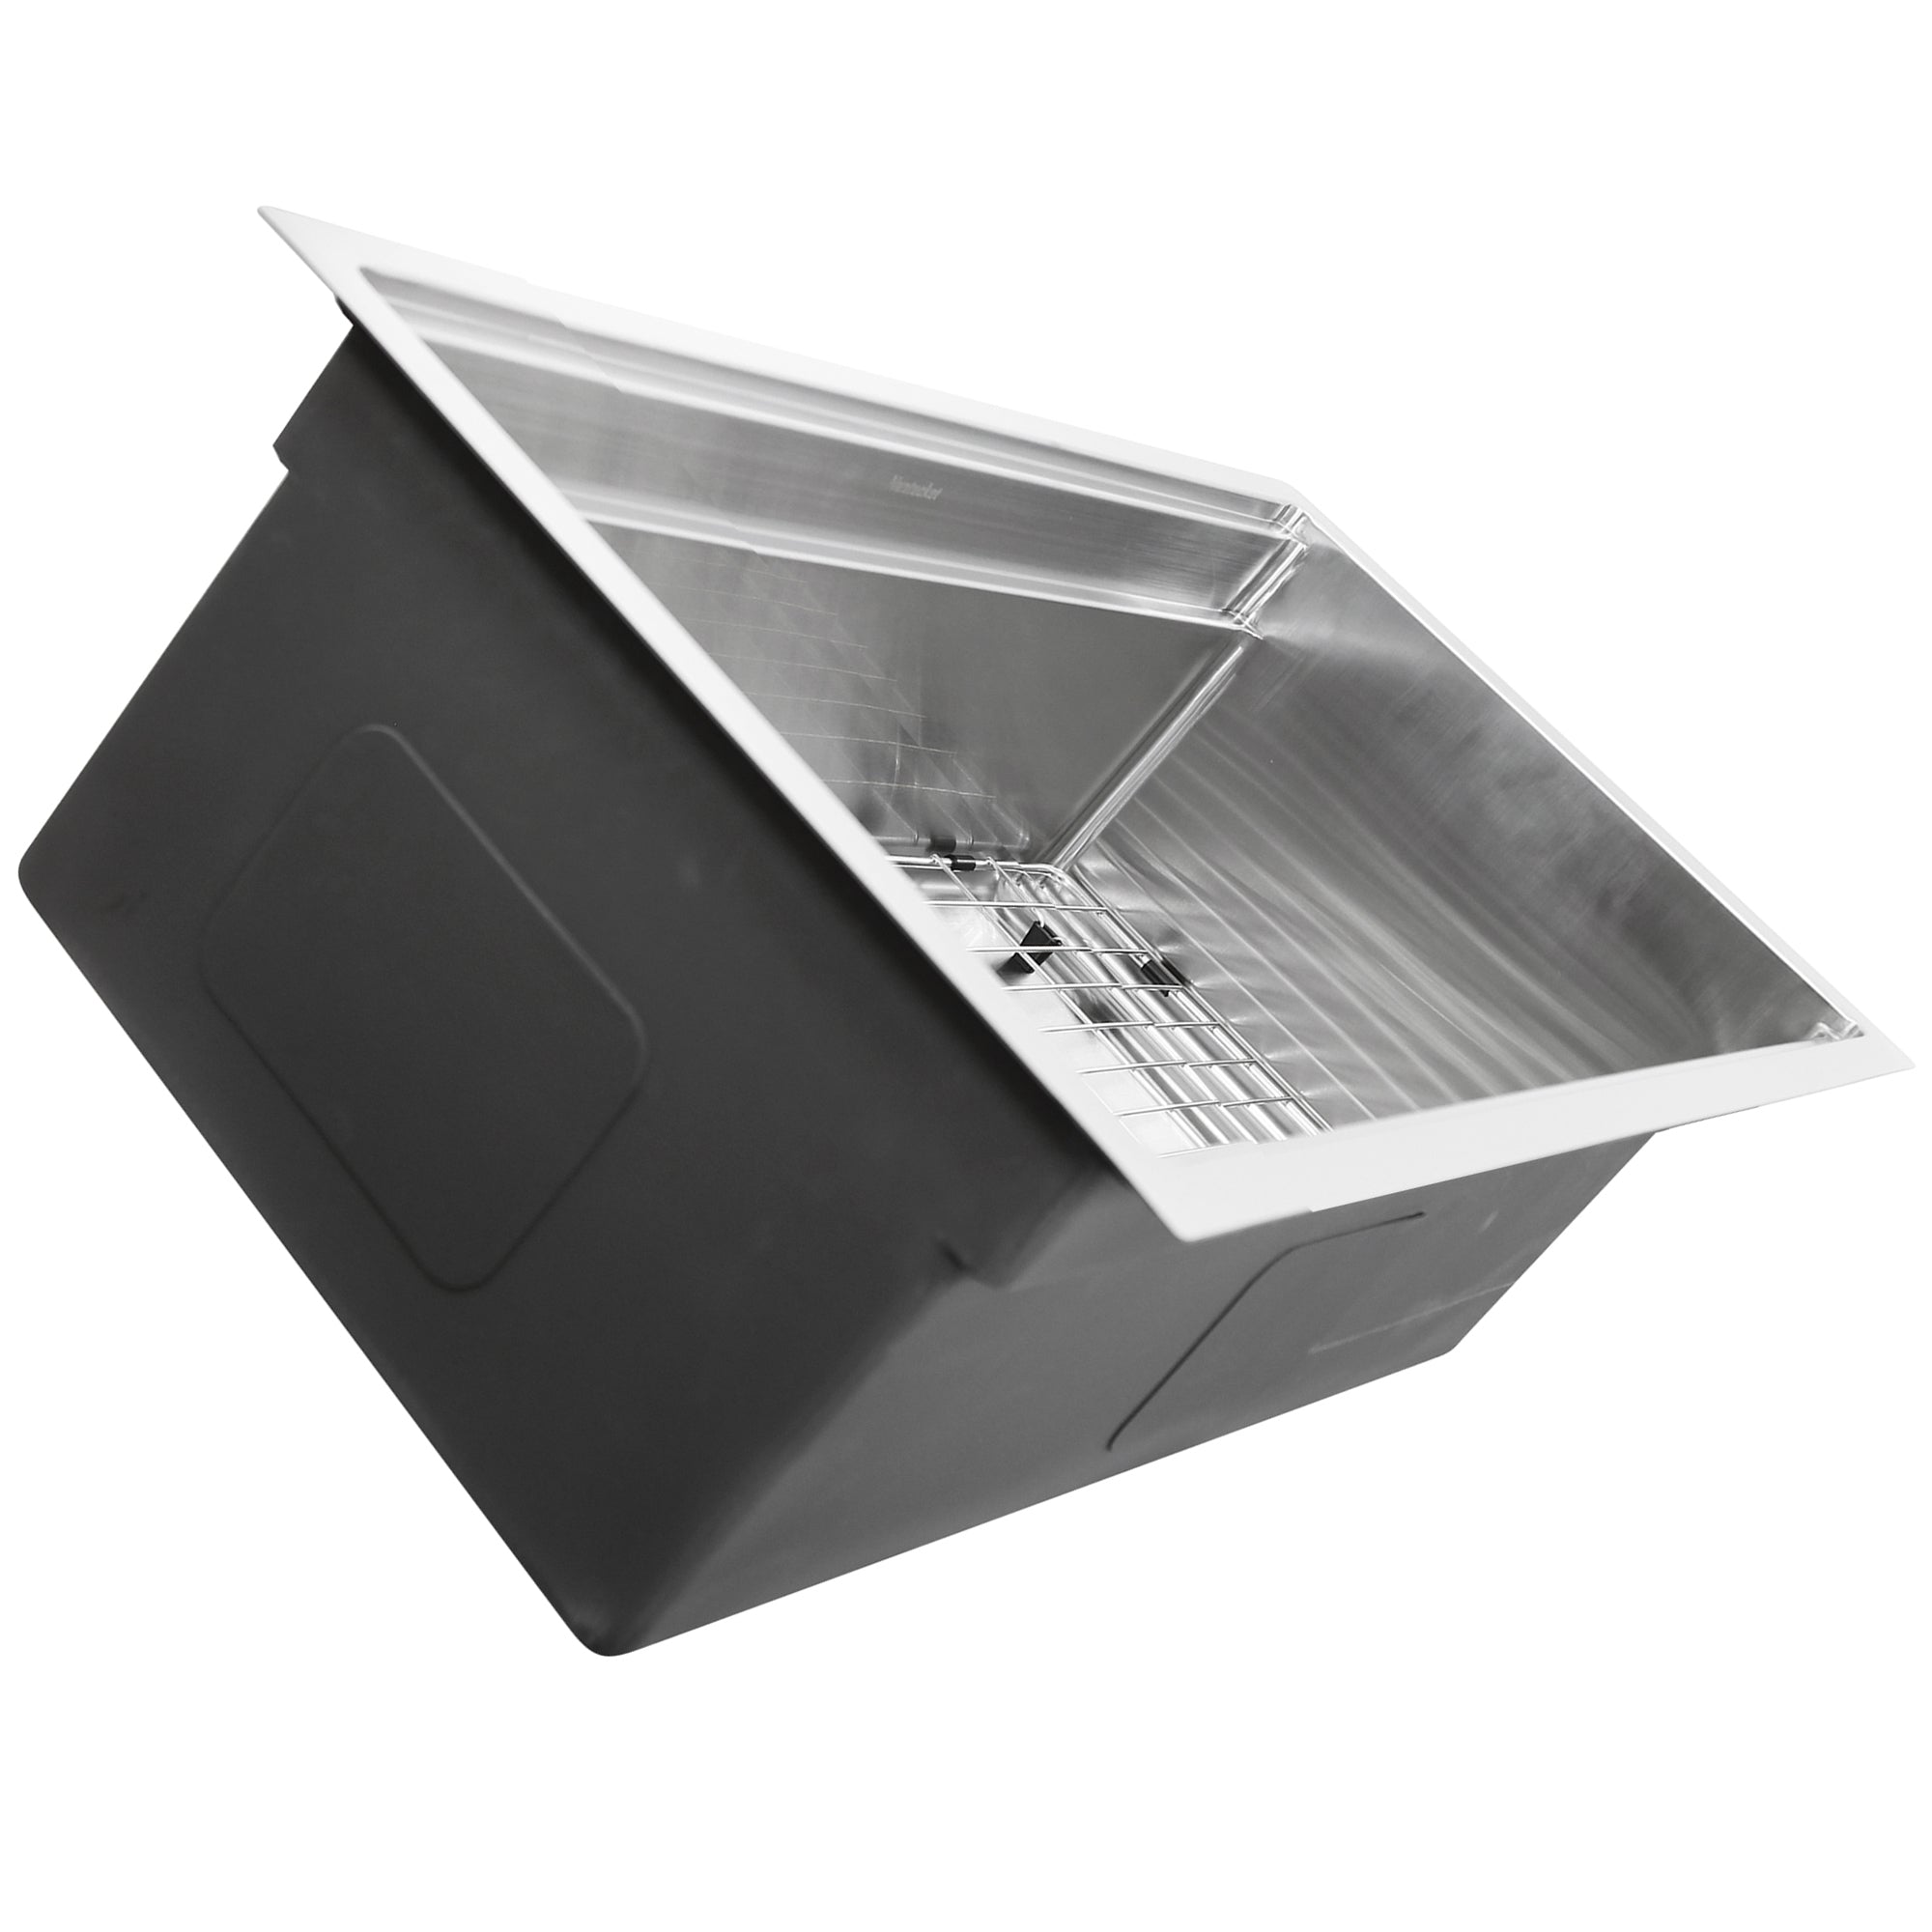 Nantucket Sinks SR-PS-3620-16 - 36" Pro Series Workstation Single Bowl Undermount Stainless Steel Kitchen Sink with Compatible Accessories